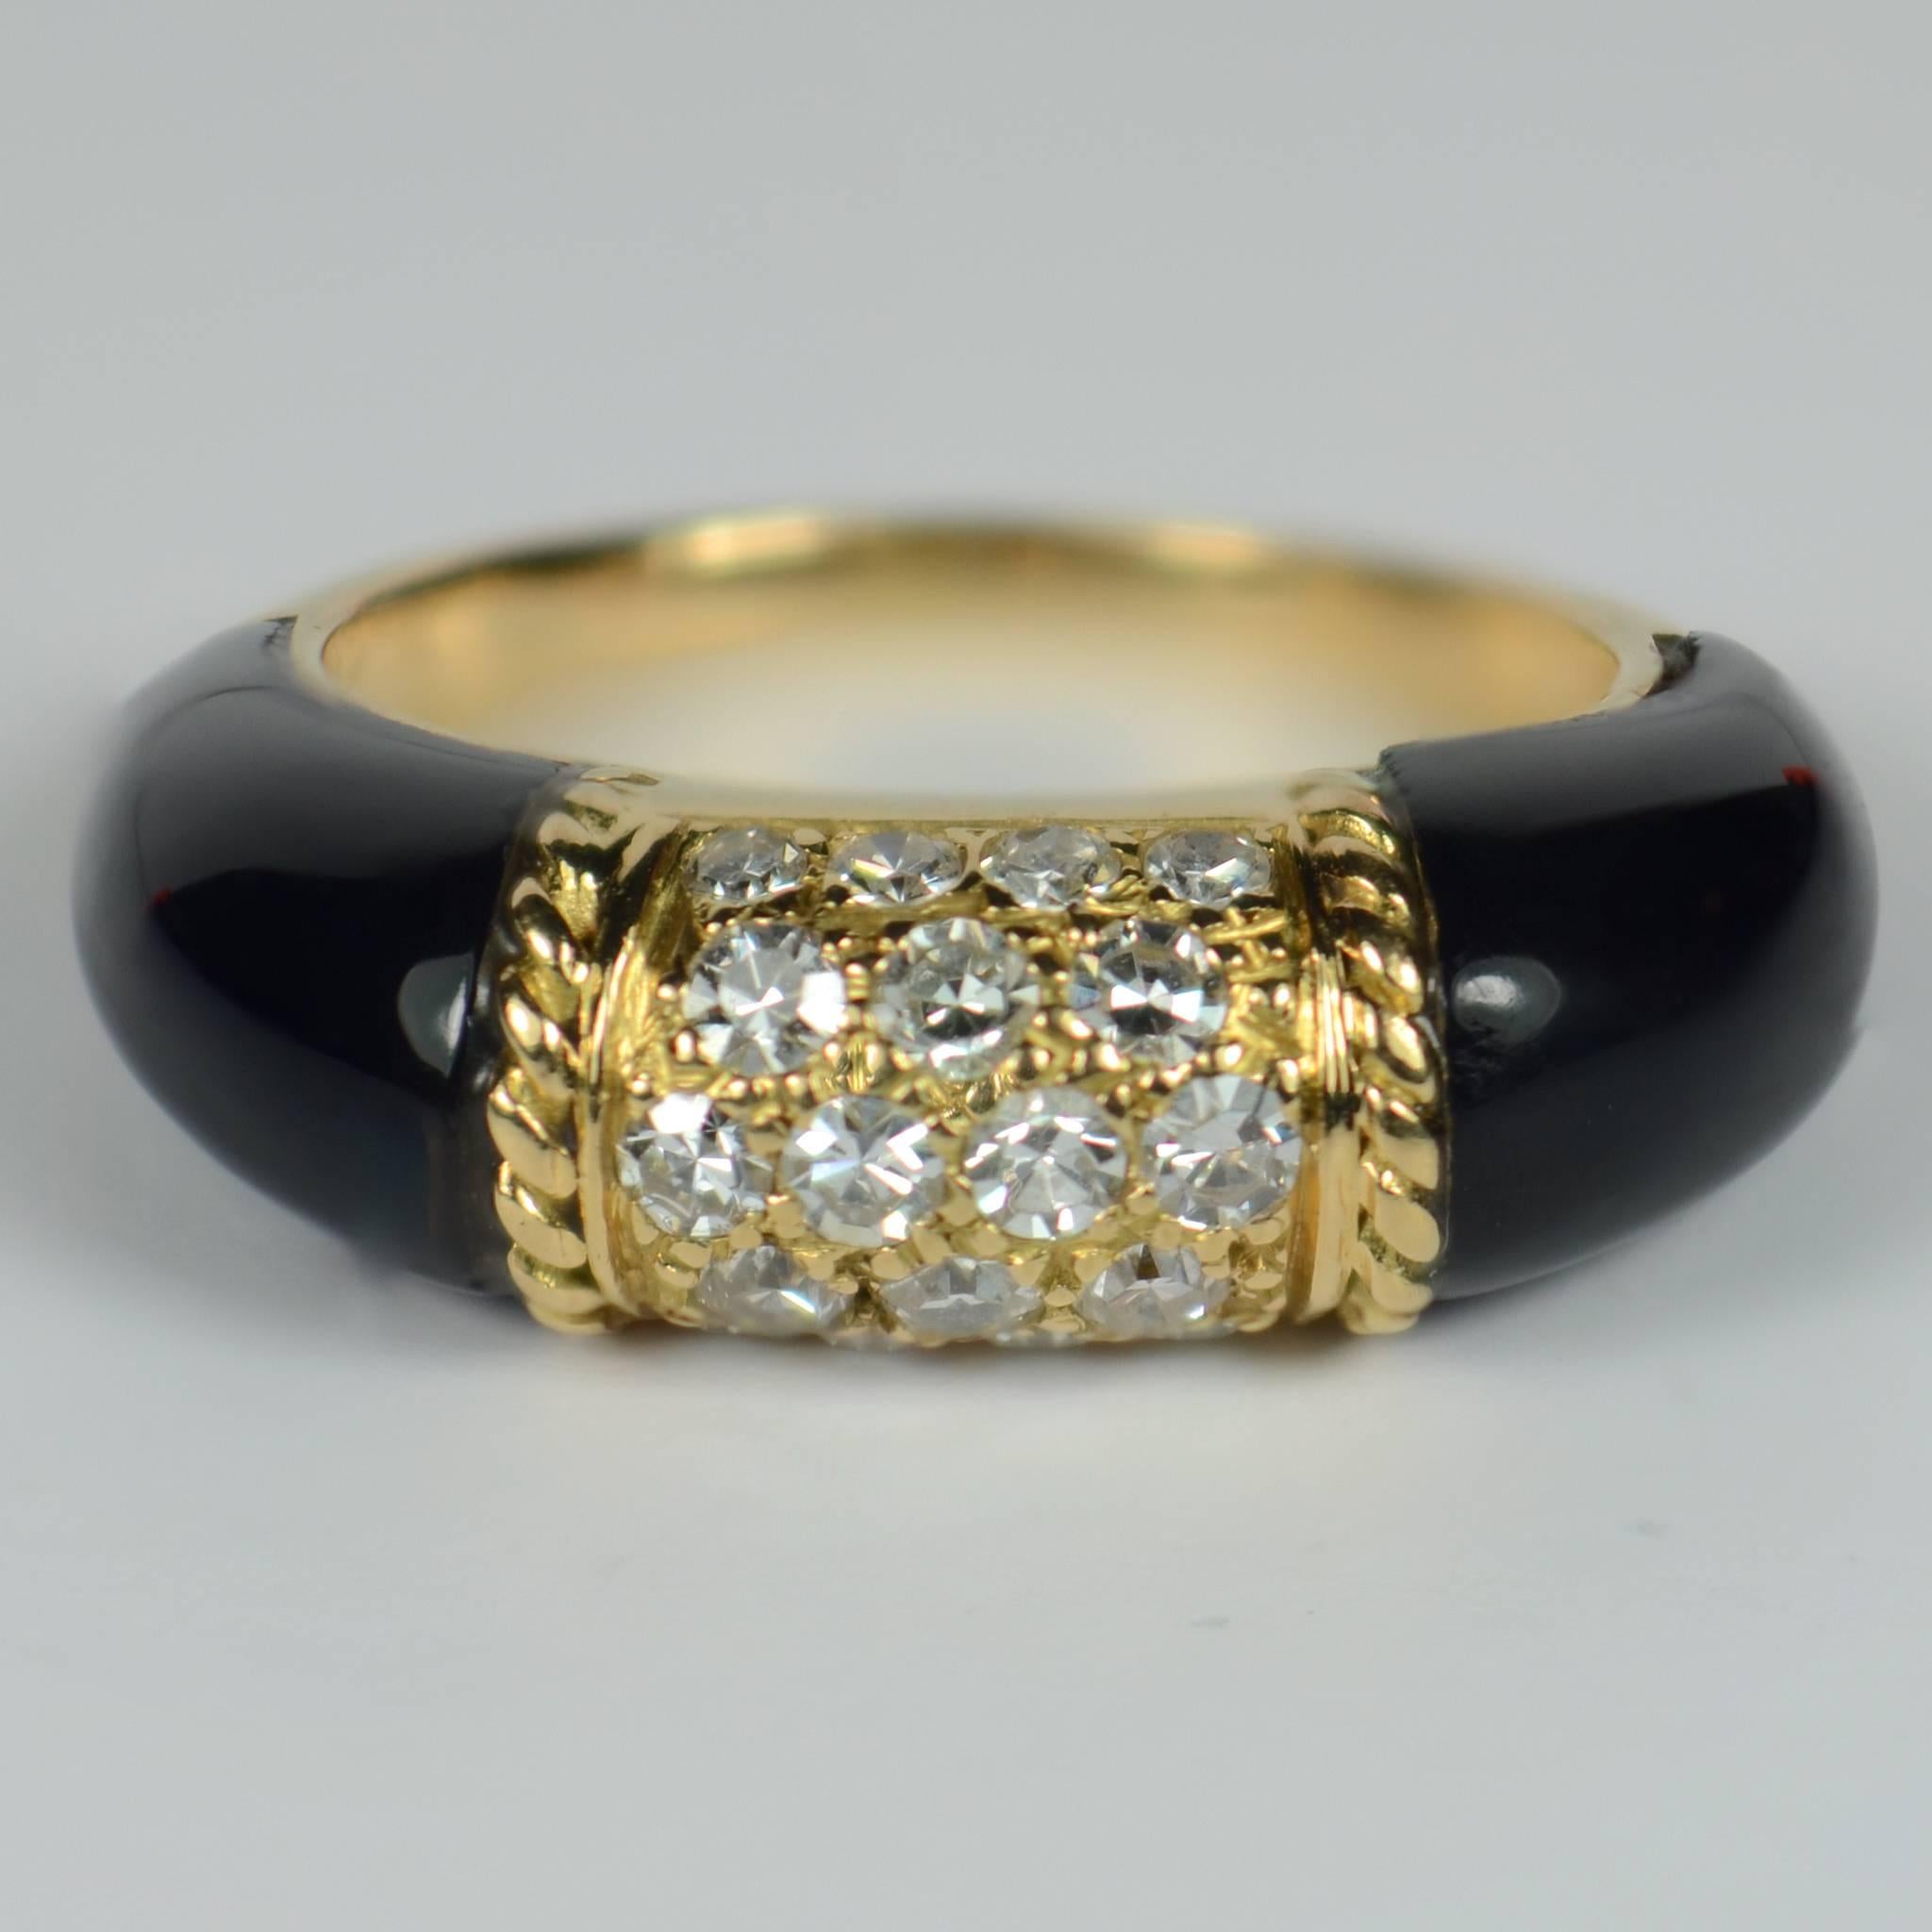 A French 18 carat yellow gold ring set with 18 round single-cut diamonds within gold ropework borders, flanked by black onyx shoulders. This ring design was created by Van Cleef & Arpels and was known as the ‘Philippine’ ring. Although this ring